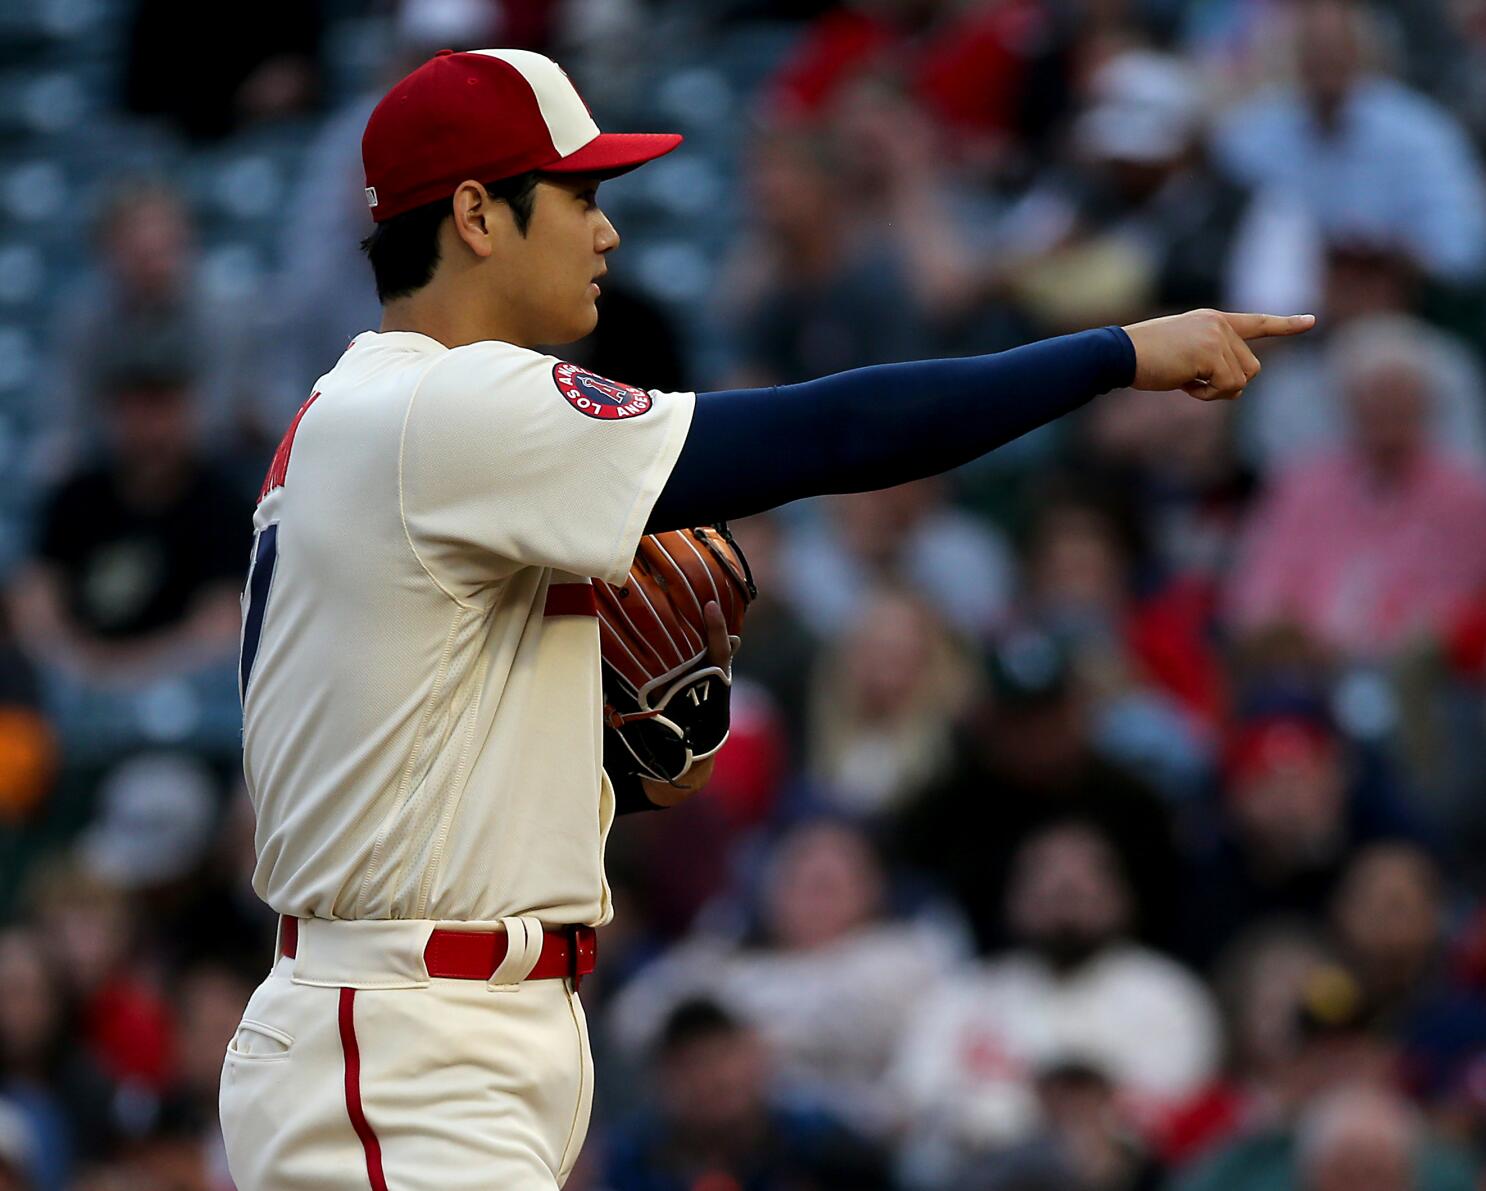 Shohei Ohtani's huge night at plate too much for Mets